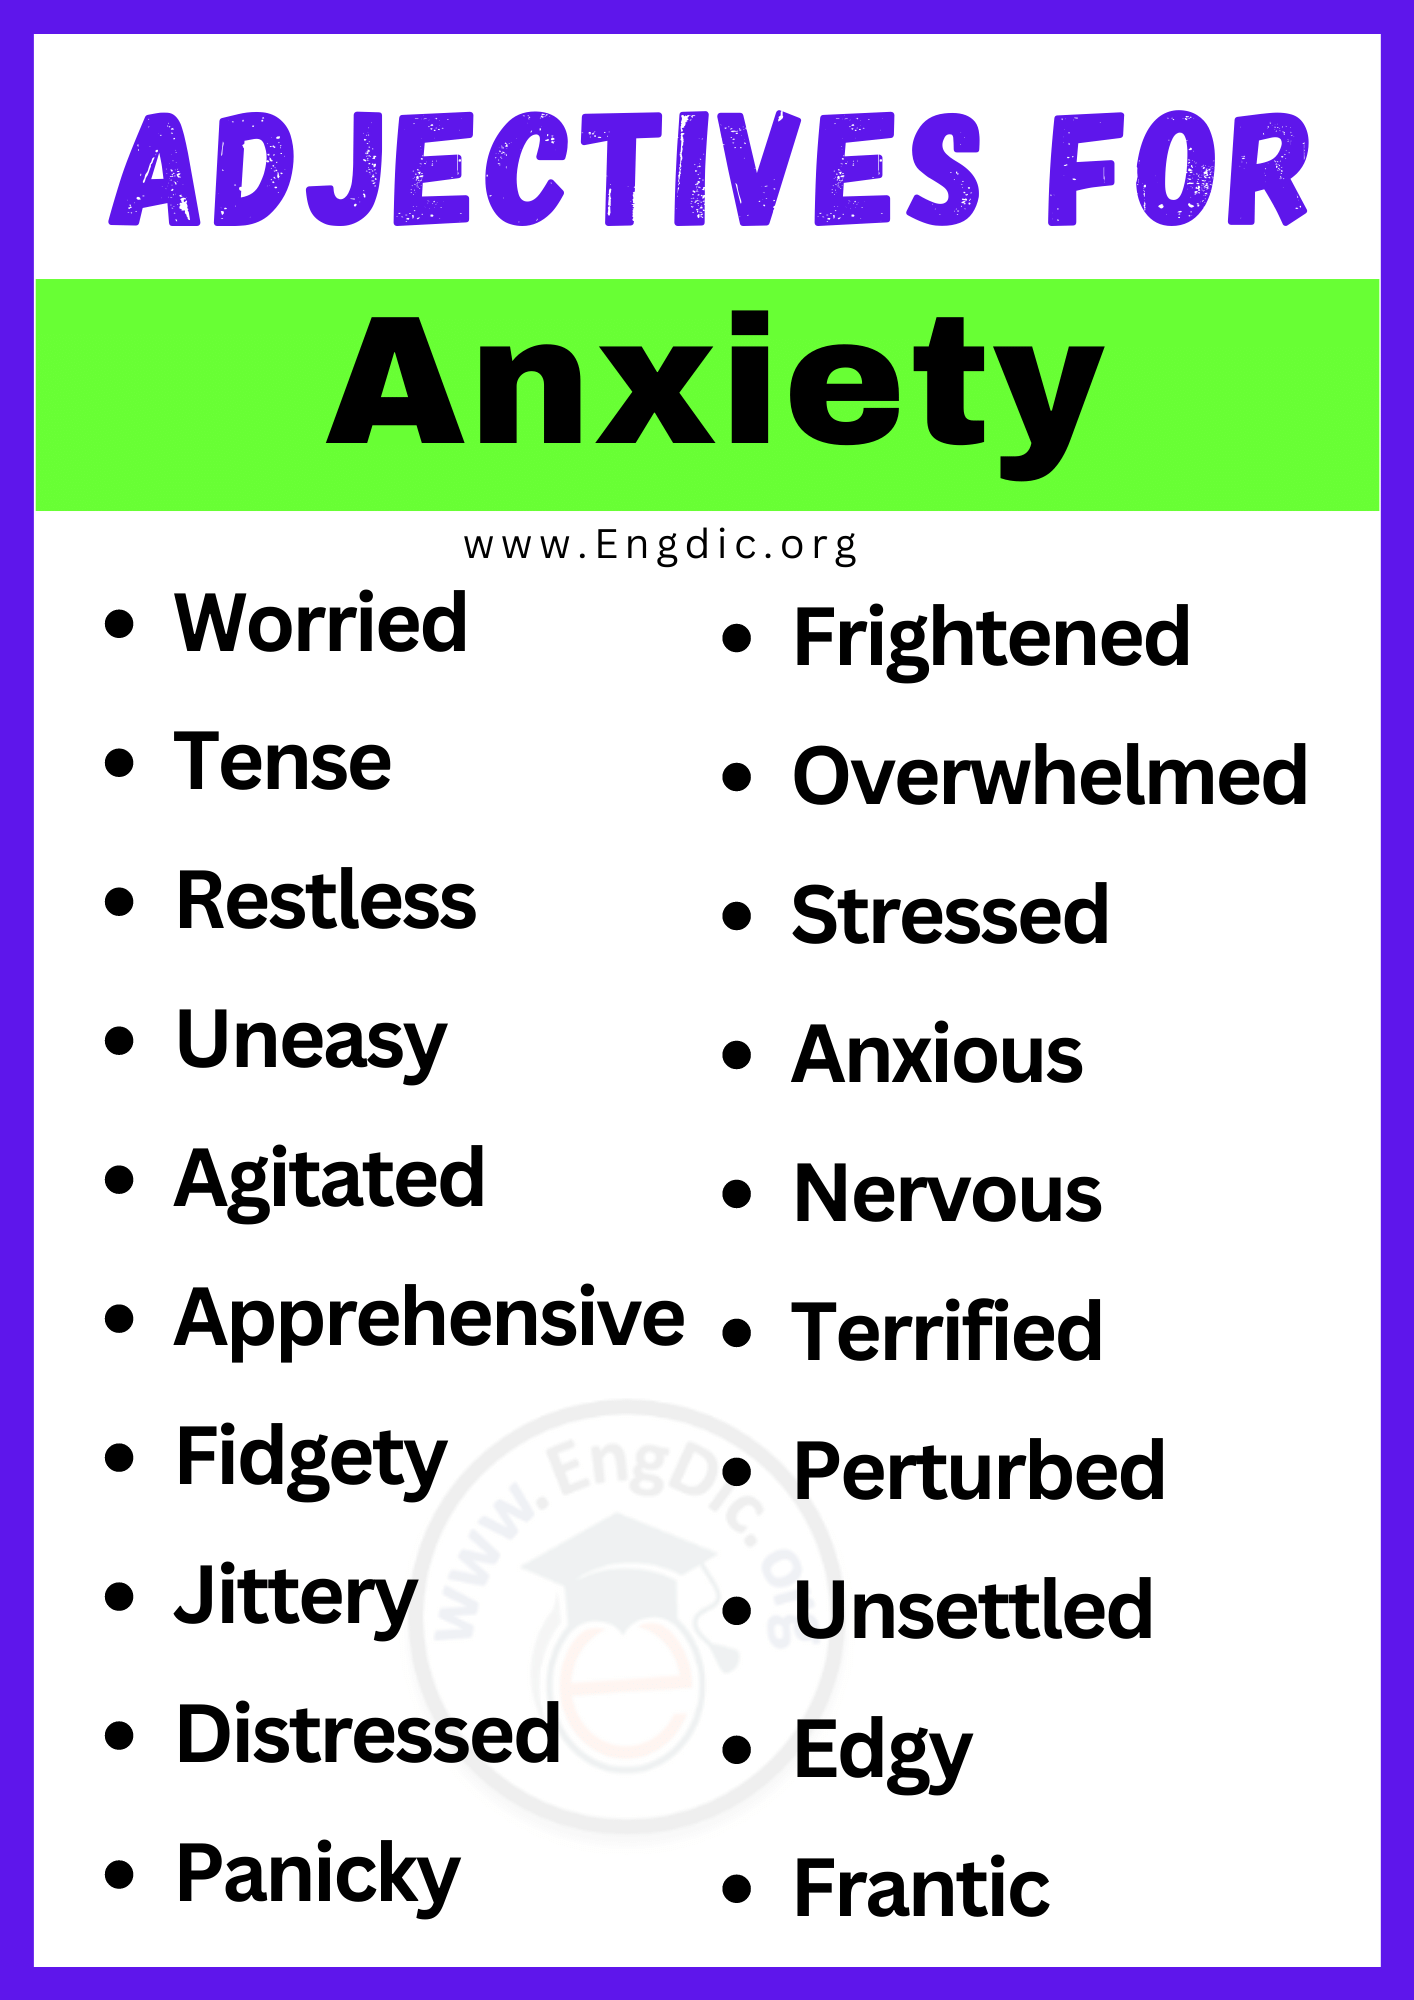 Adjectives for Anxiety